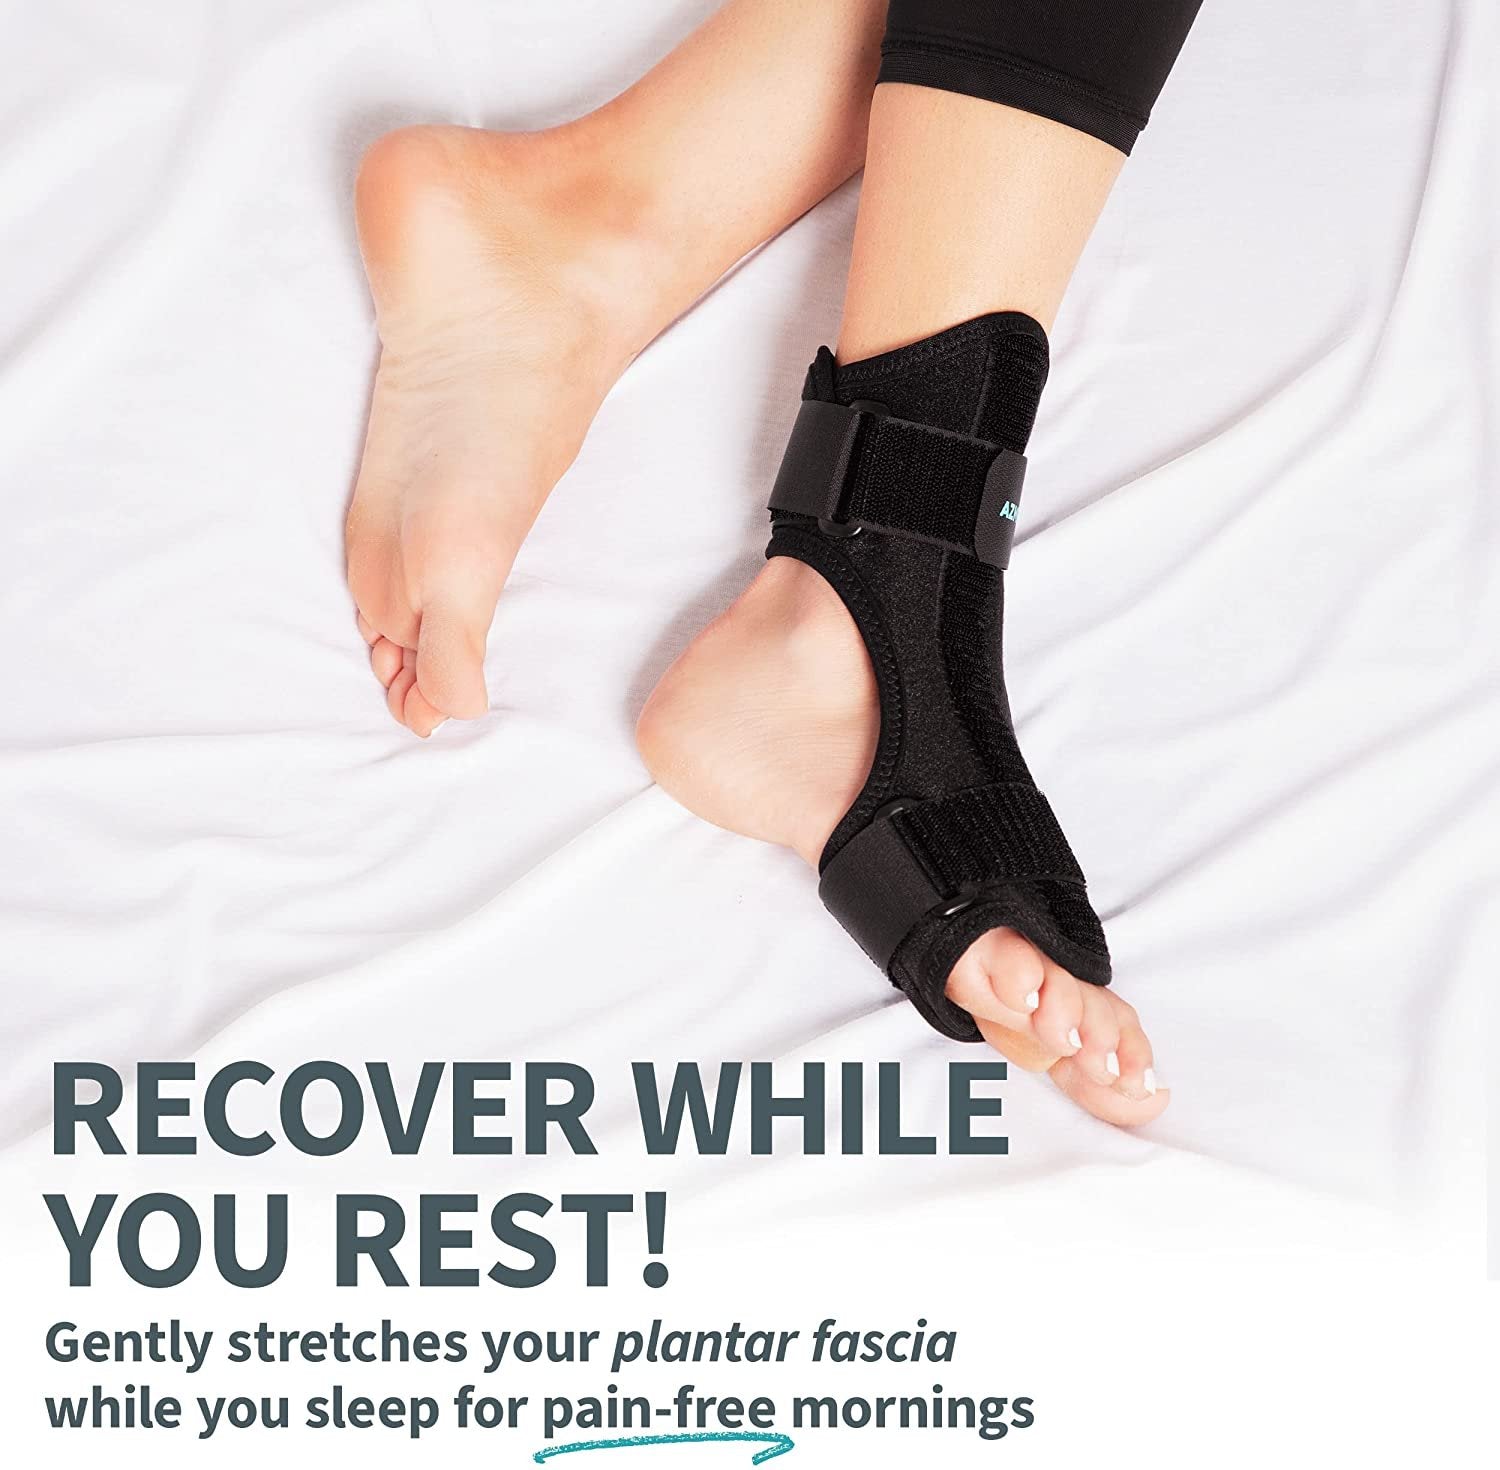 AZMED Plantar Fasciitis Night Splint - Lightweight & Breathable, Black - Adjustable for Foot Drop, Arch Pain, Heel & Ankle Support - Fits Most Feet - Pack of 1